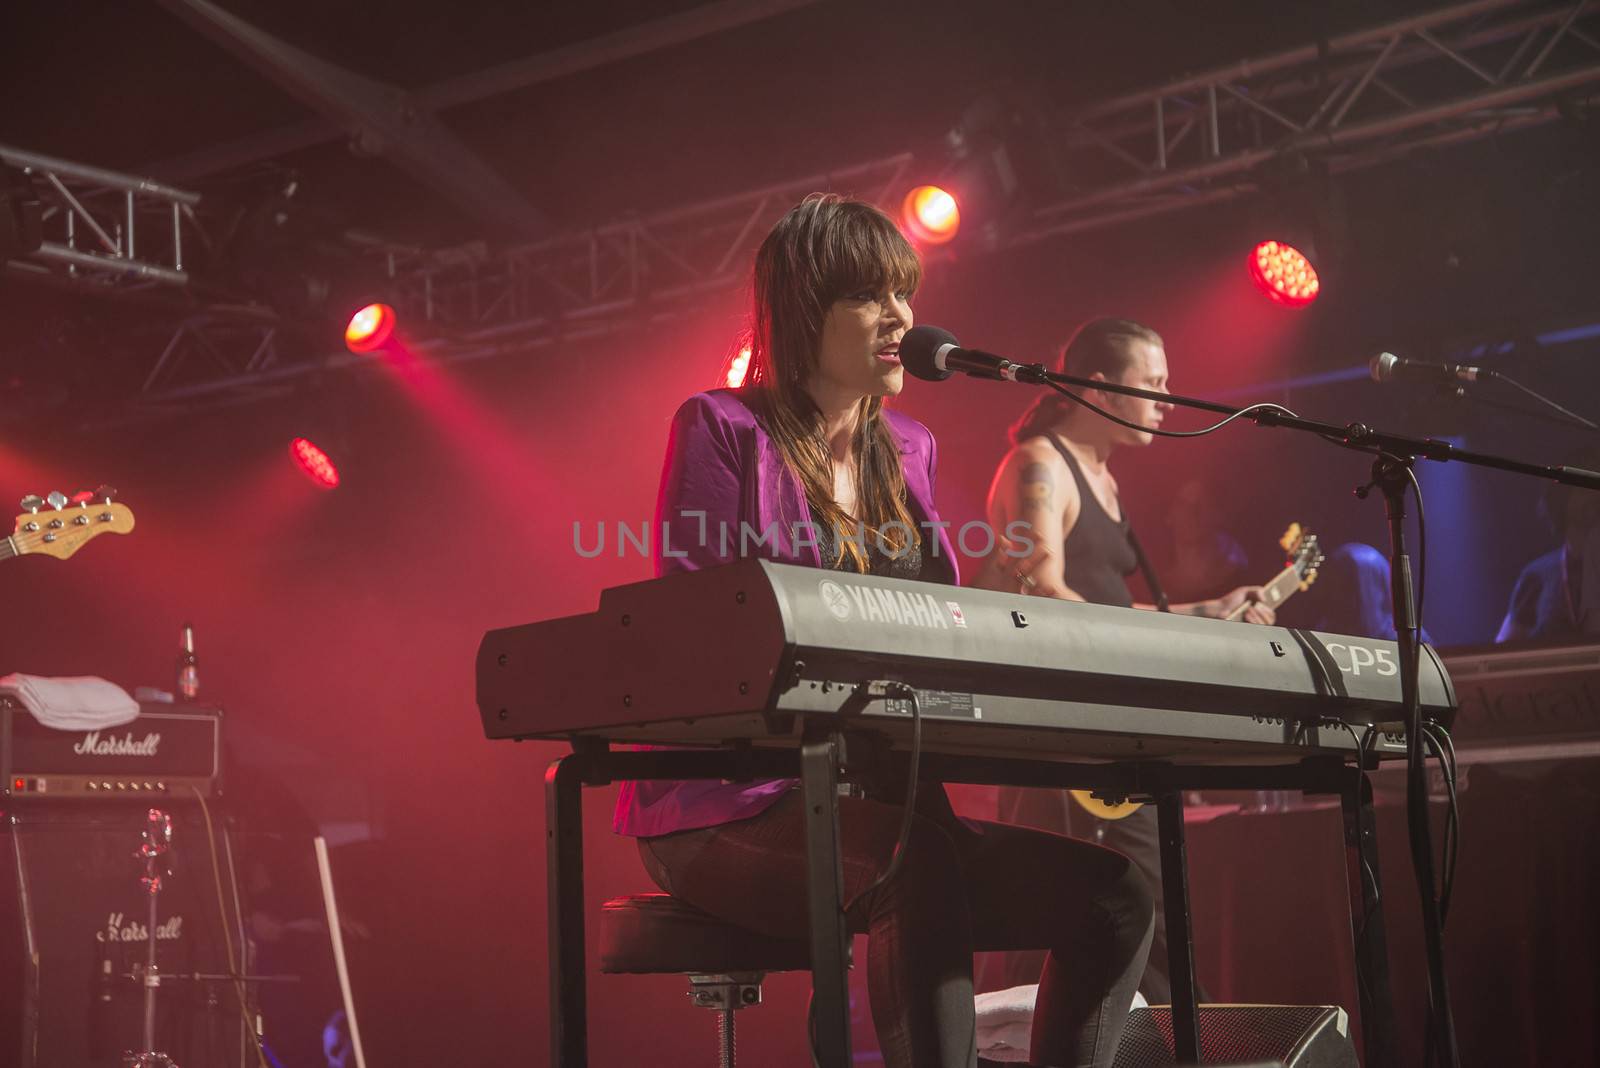 notodden blues festival 2013, beth hart band, usa by steirus